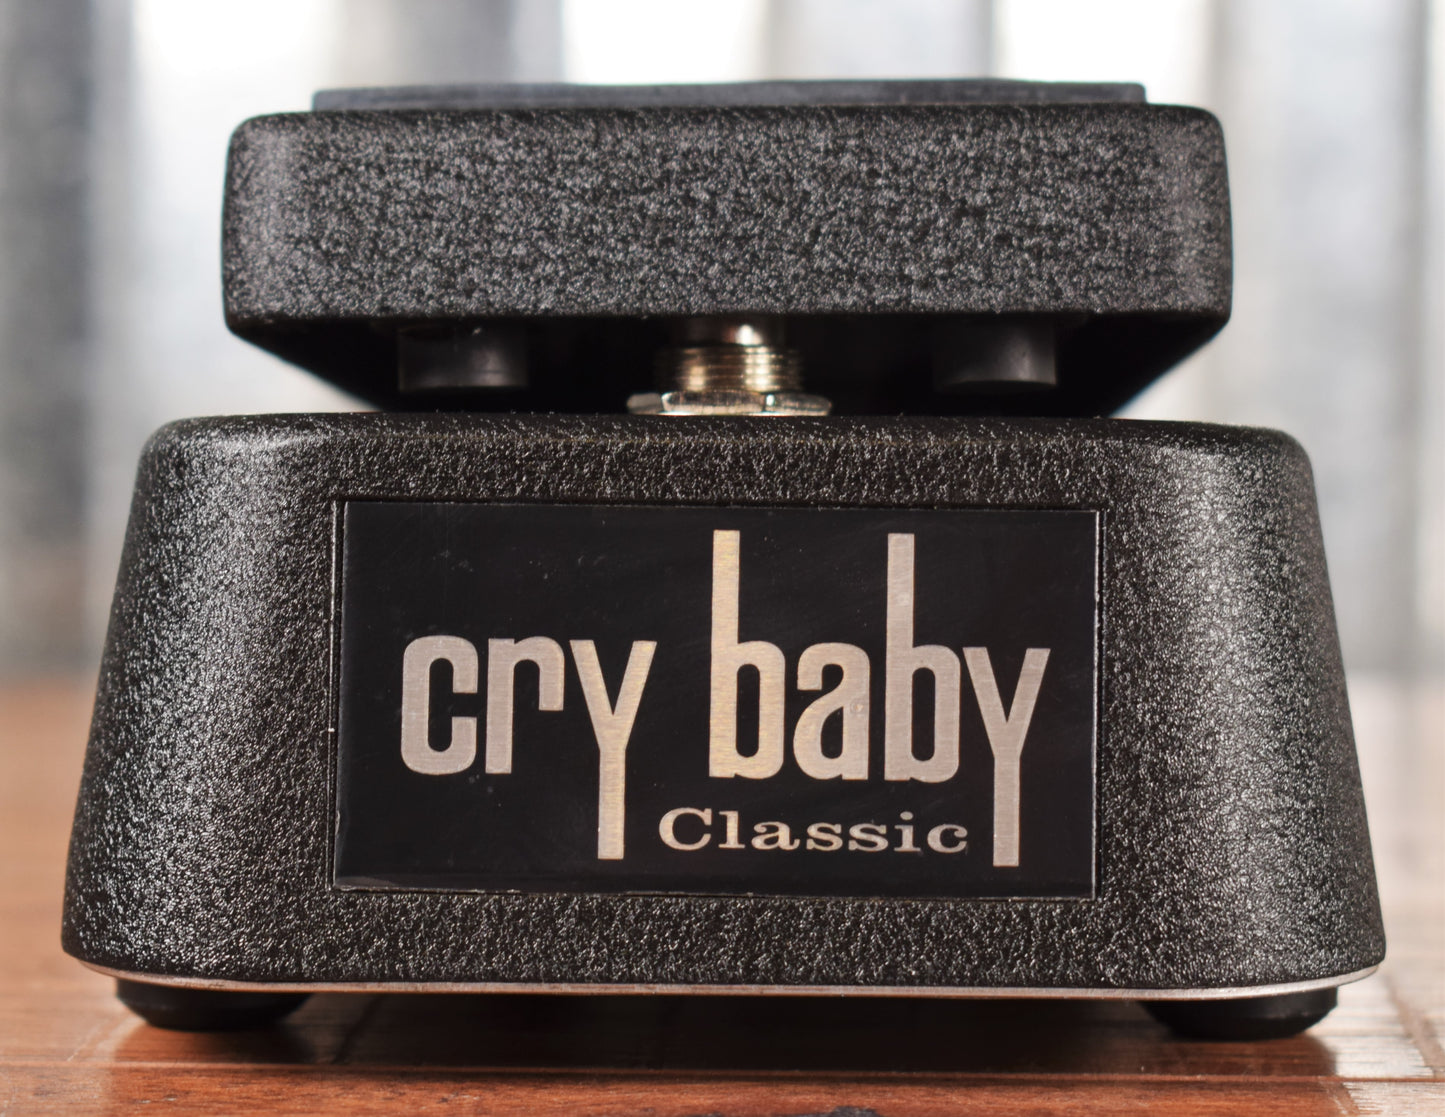 Dunlop GCB95F Cry Baby Classic Fasel Wah Guitar Effect Pedal